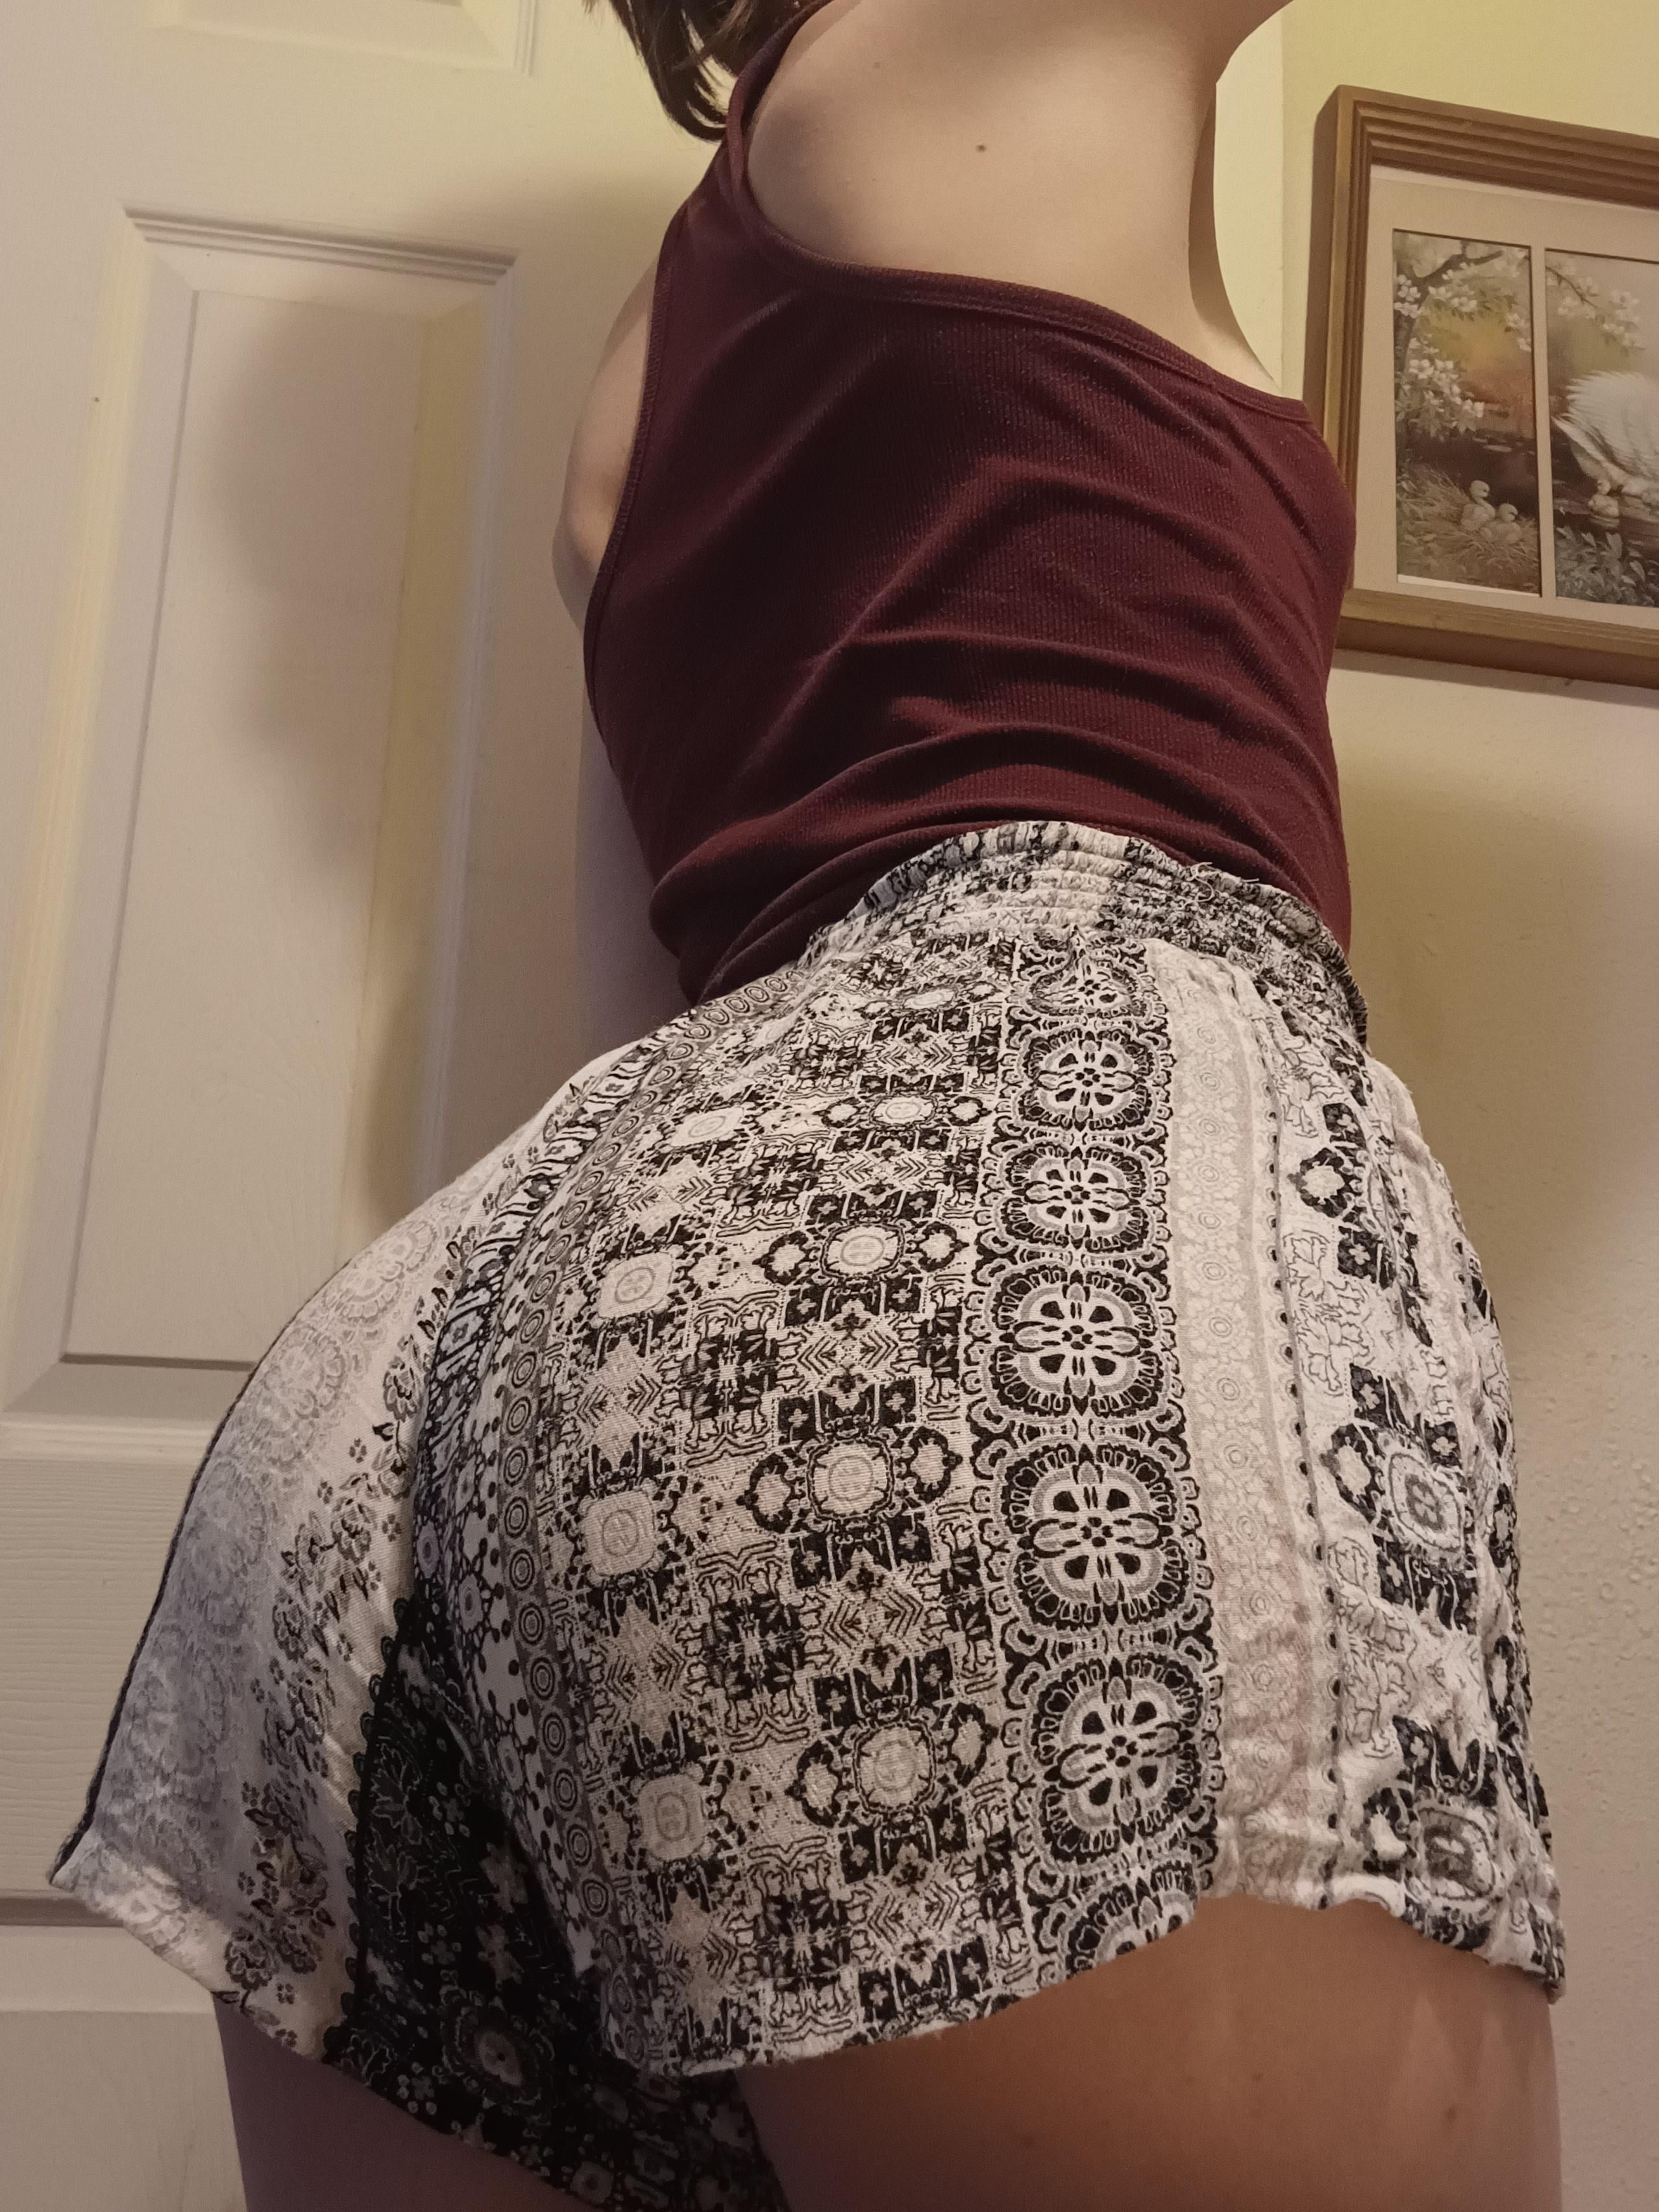 PAWG do you think everyone was staring at my ass